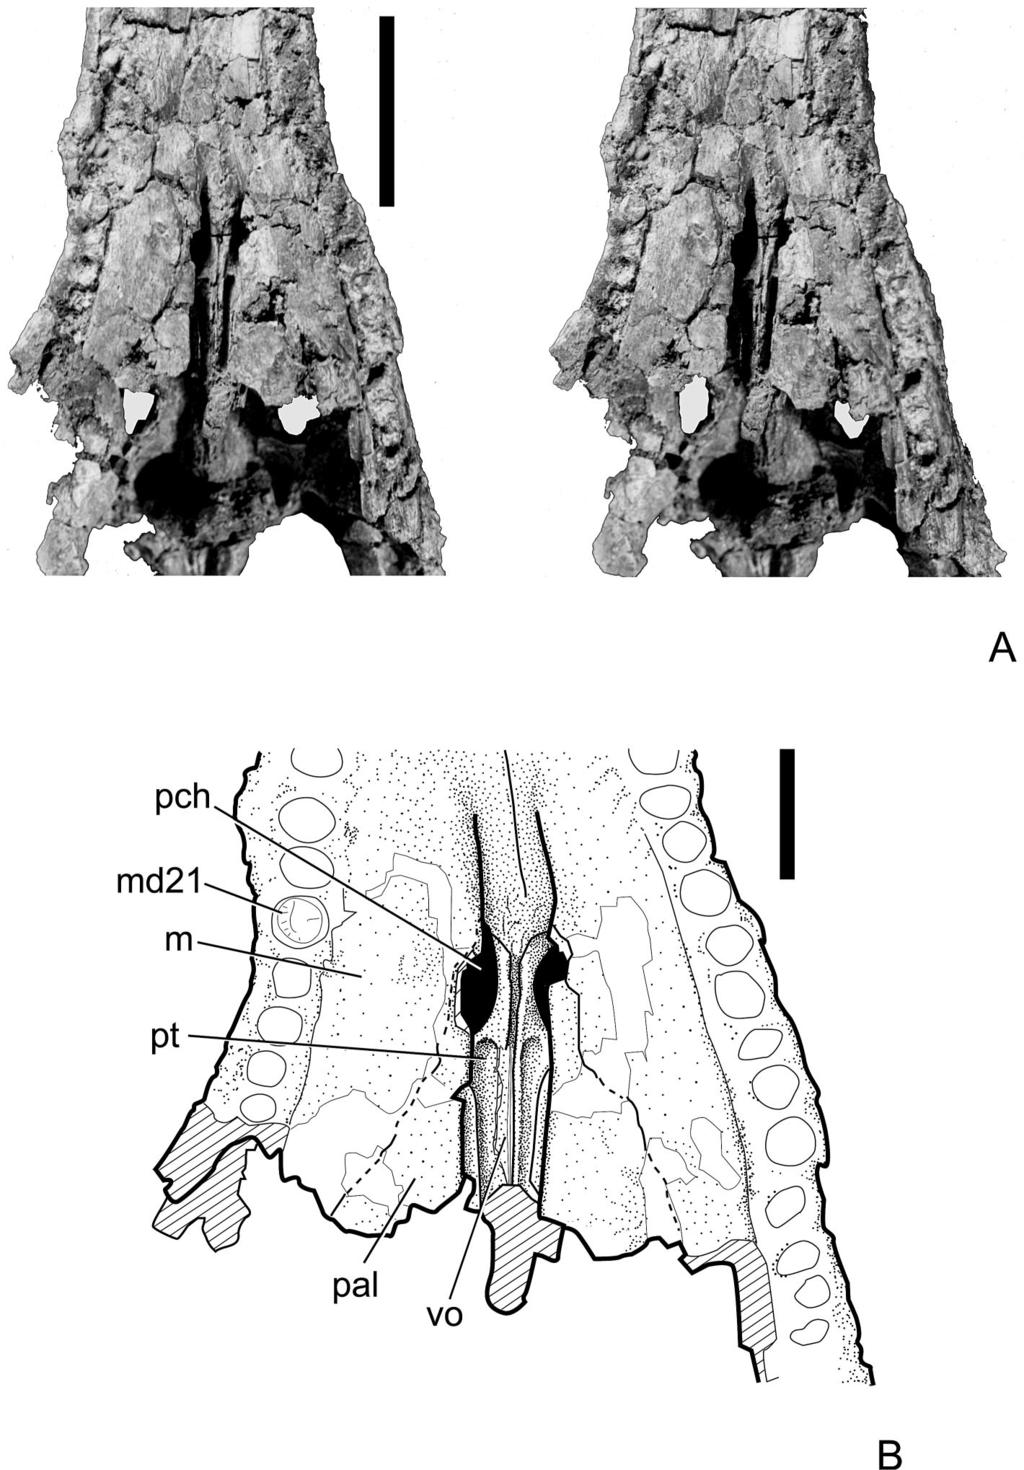 TYKOSKI ET AL. NEW EARLY JURASSIC CROCODYLIFORM 63 FIGURE 8. Calsoyasuchus valliceps nov. (TMM 43631-1). A, stereophotograph pair focusing on palatal shelves, primary choanae, and nasopharyngeal duct.